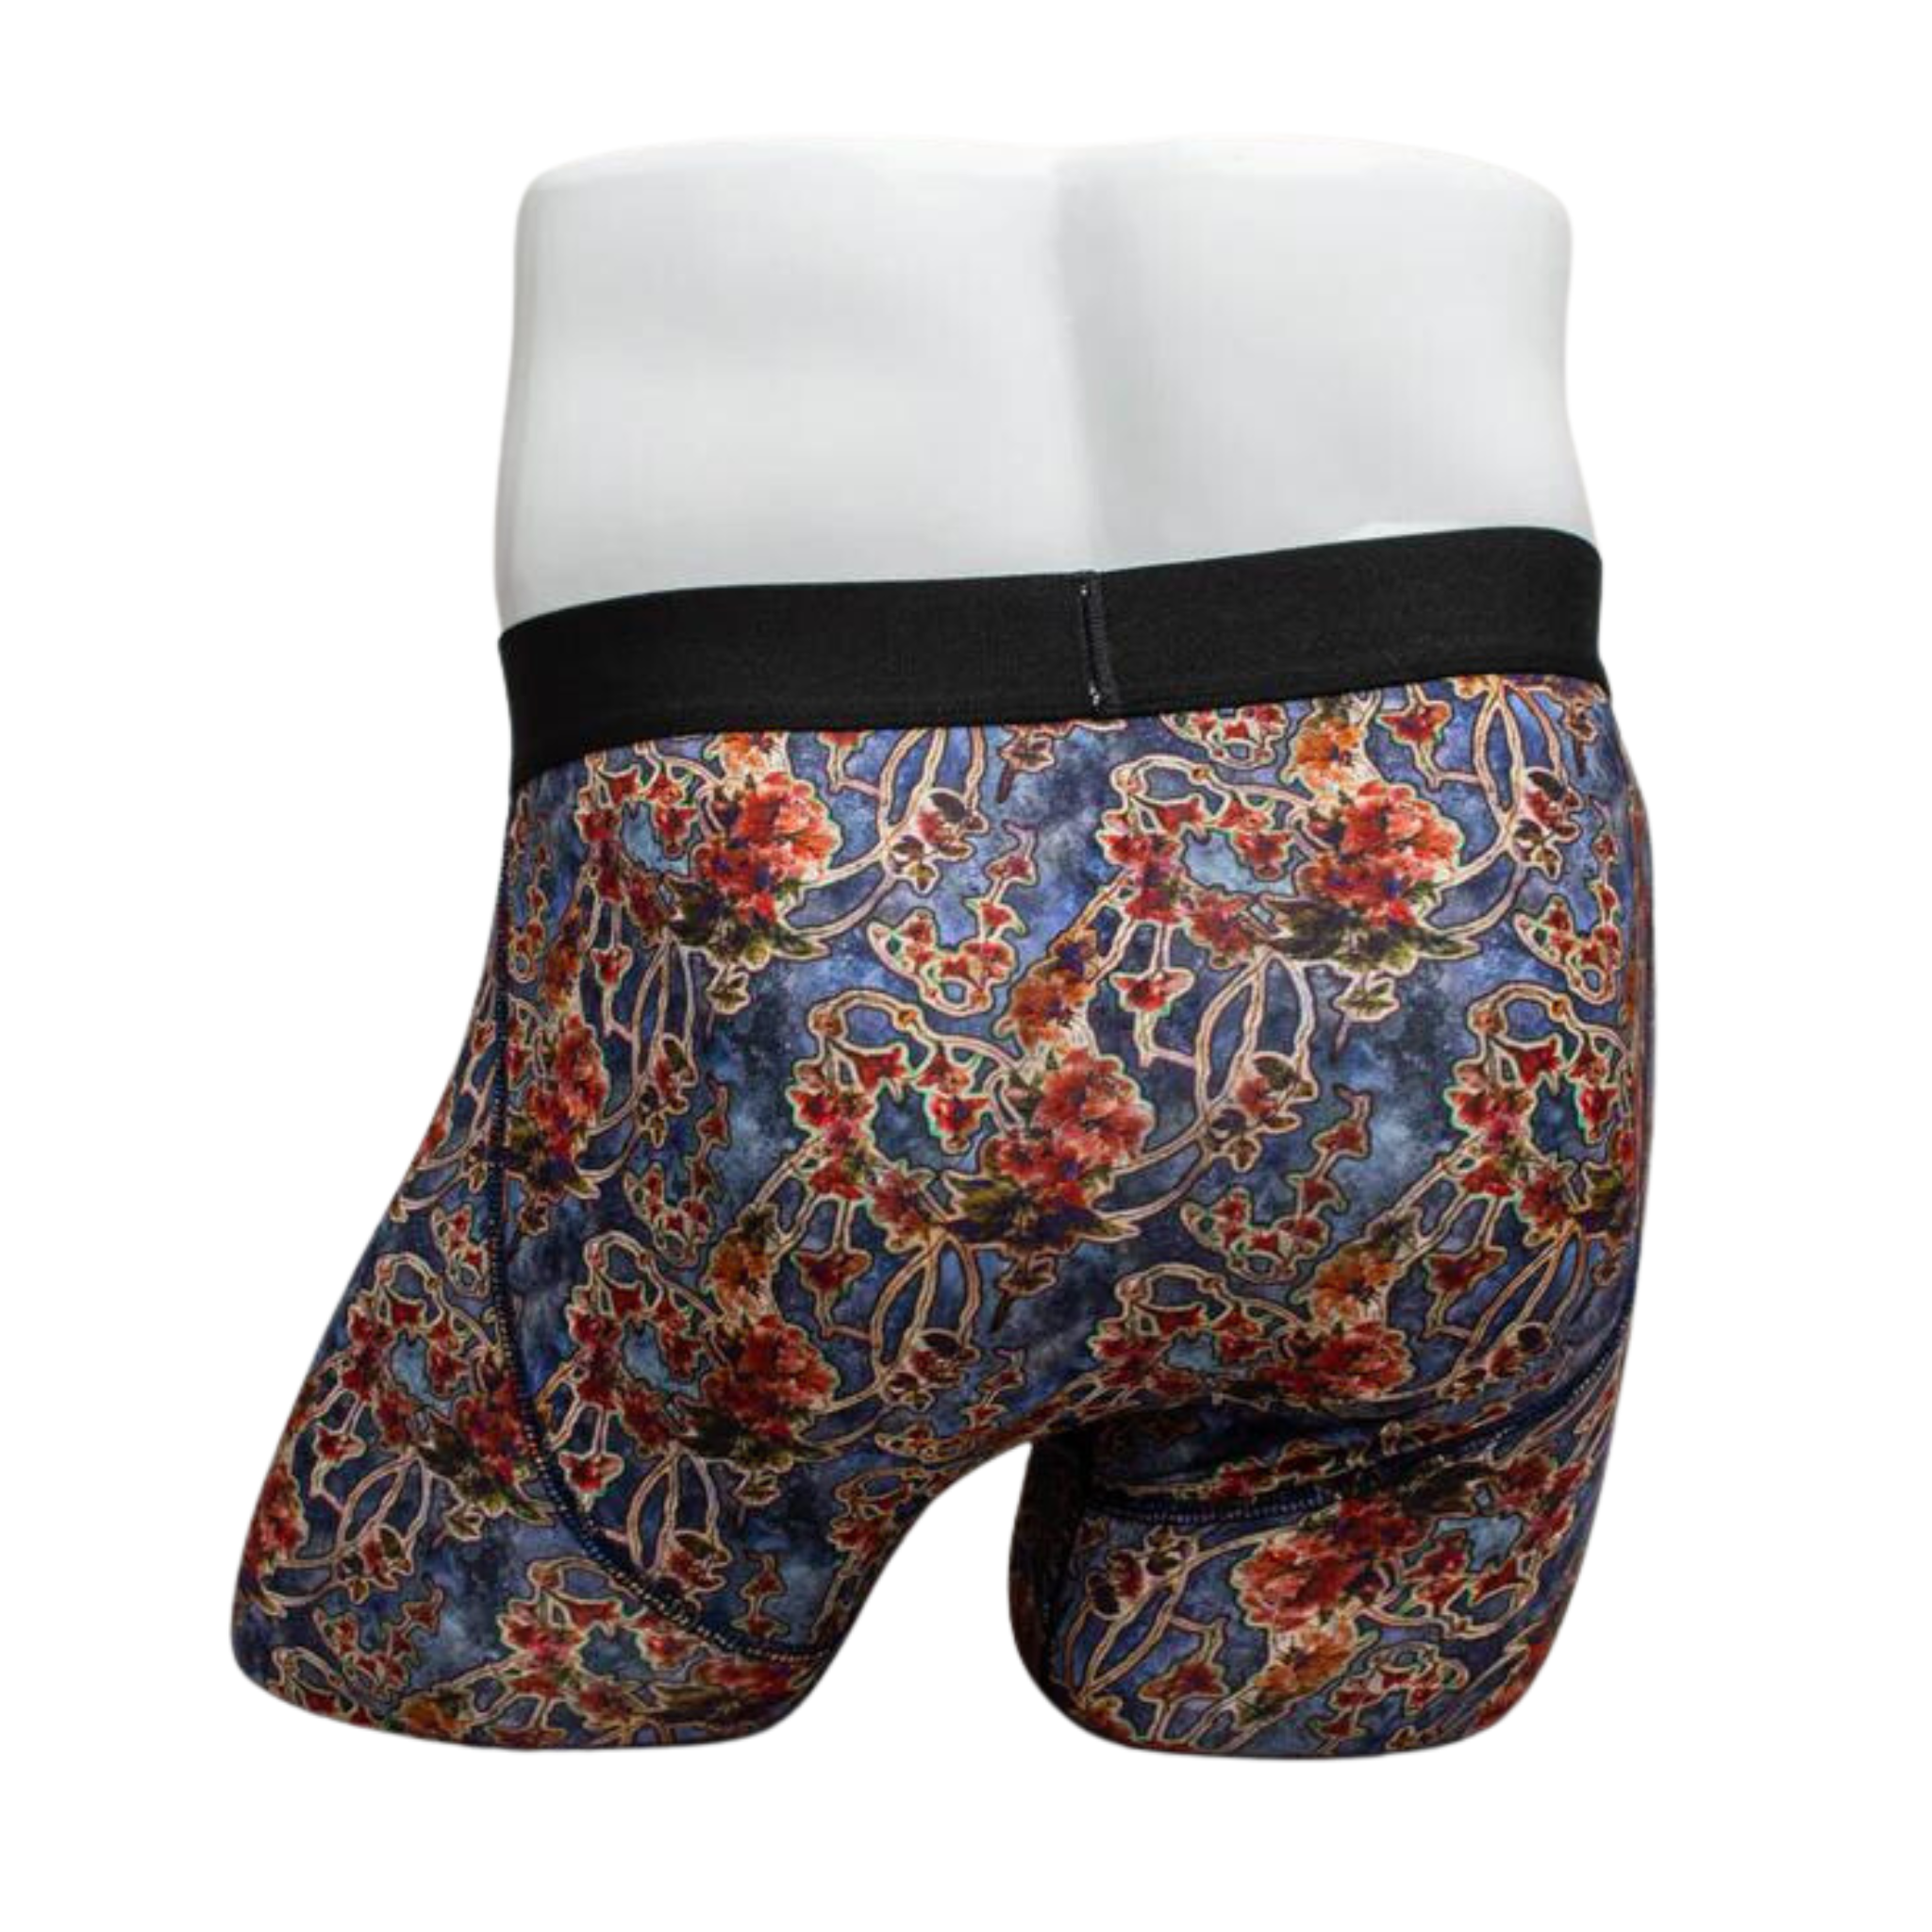 Flying High Softer Than Cotton Boxer Brief // Blue (L) - Warriors & Scholars  Underwear - Touch of Modern